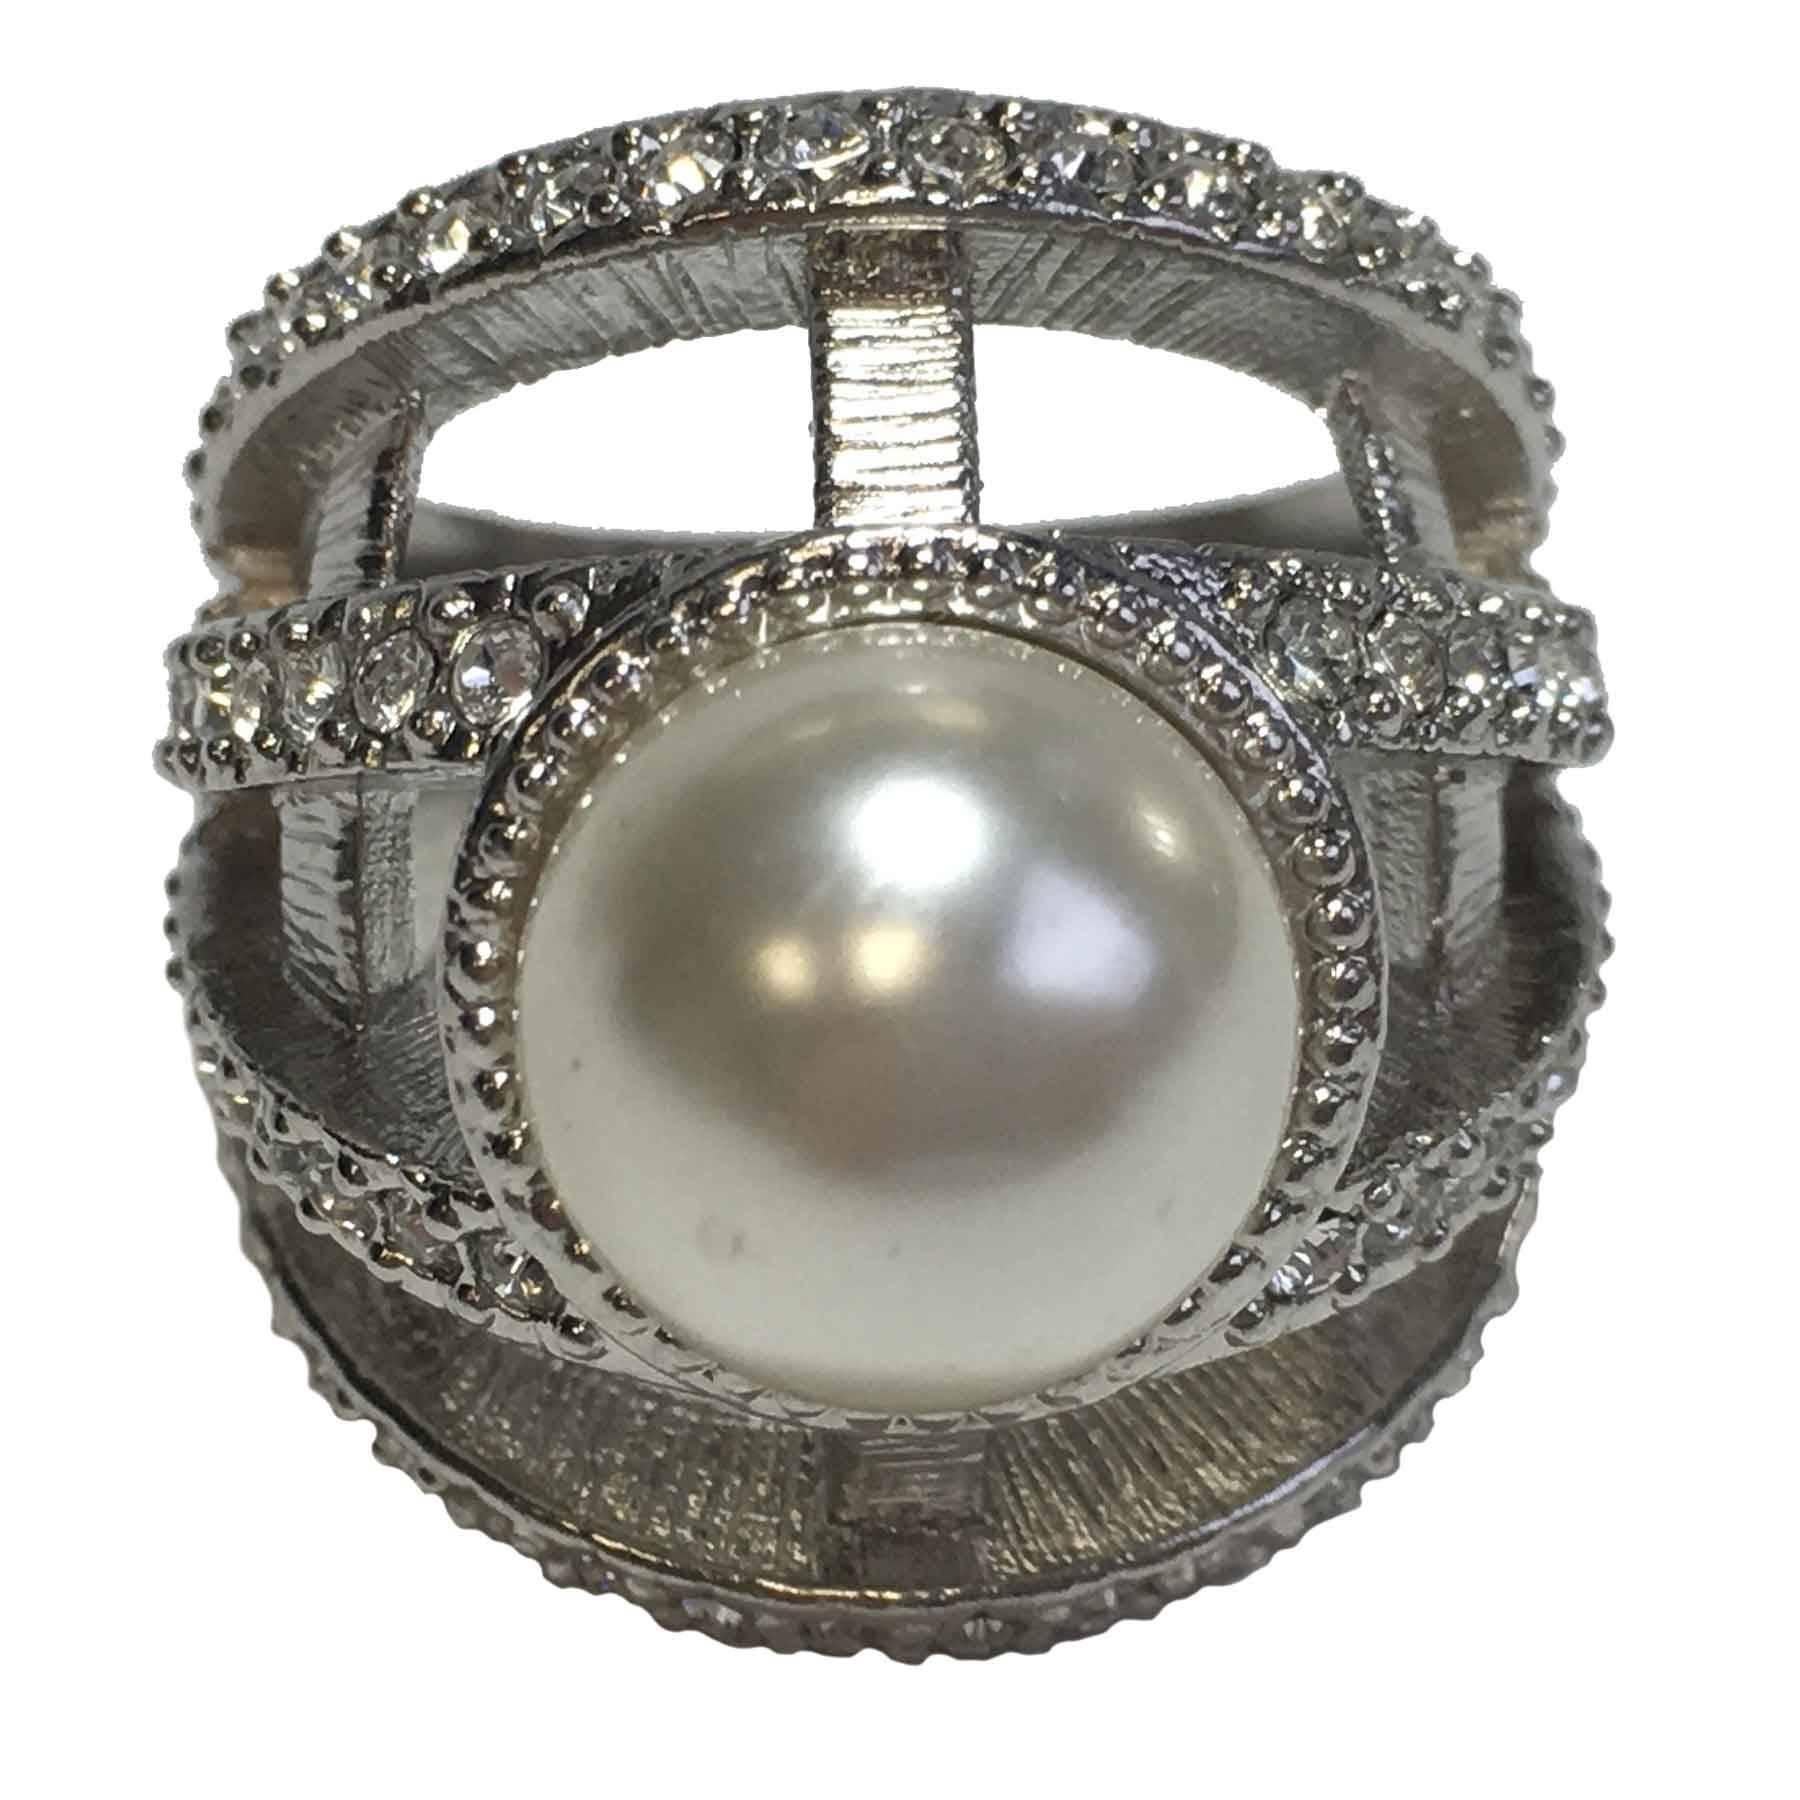 Very beautiful Chanel ring 'Jewelery' model in silver plated metal, glass pearl and rhinestones.

Size: 54FR

Dimensions: inside diameter: 1,7 cm, Width of the top of the ring: 2,3 cm

Public Price 2016 : 790 euros

Delivered in a Valois Vintage